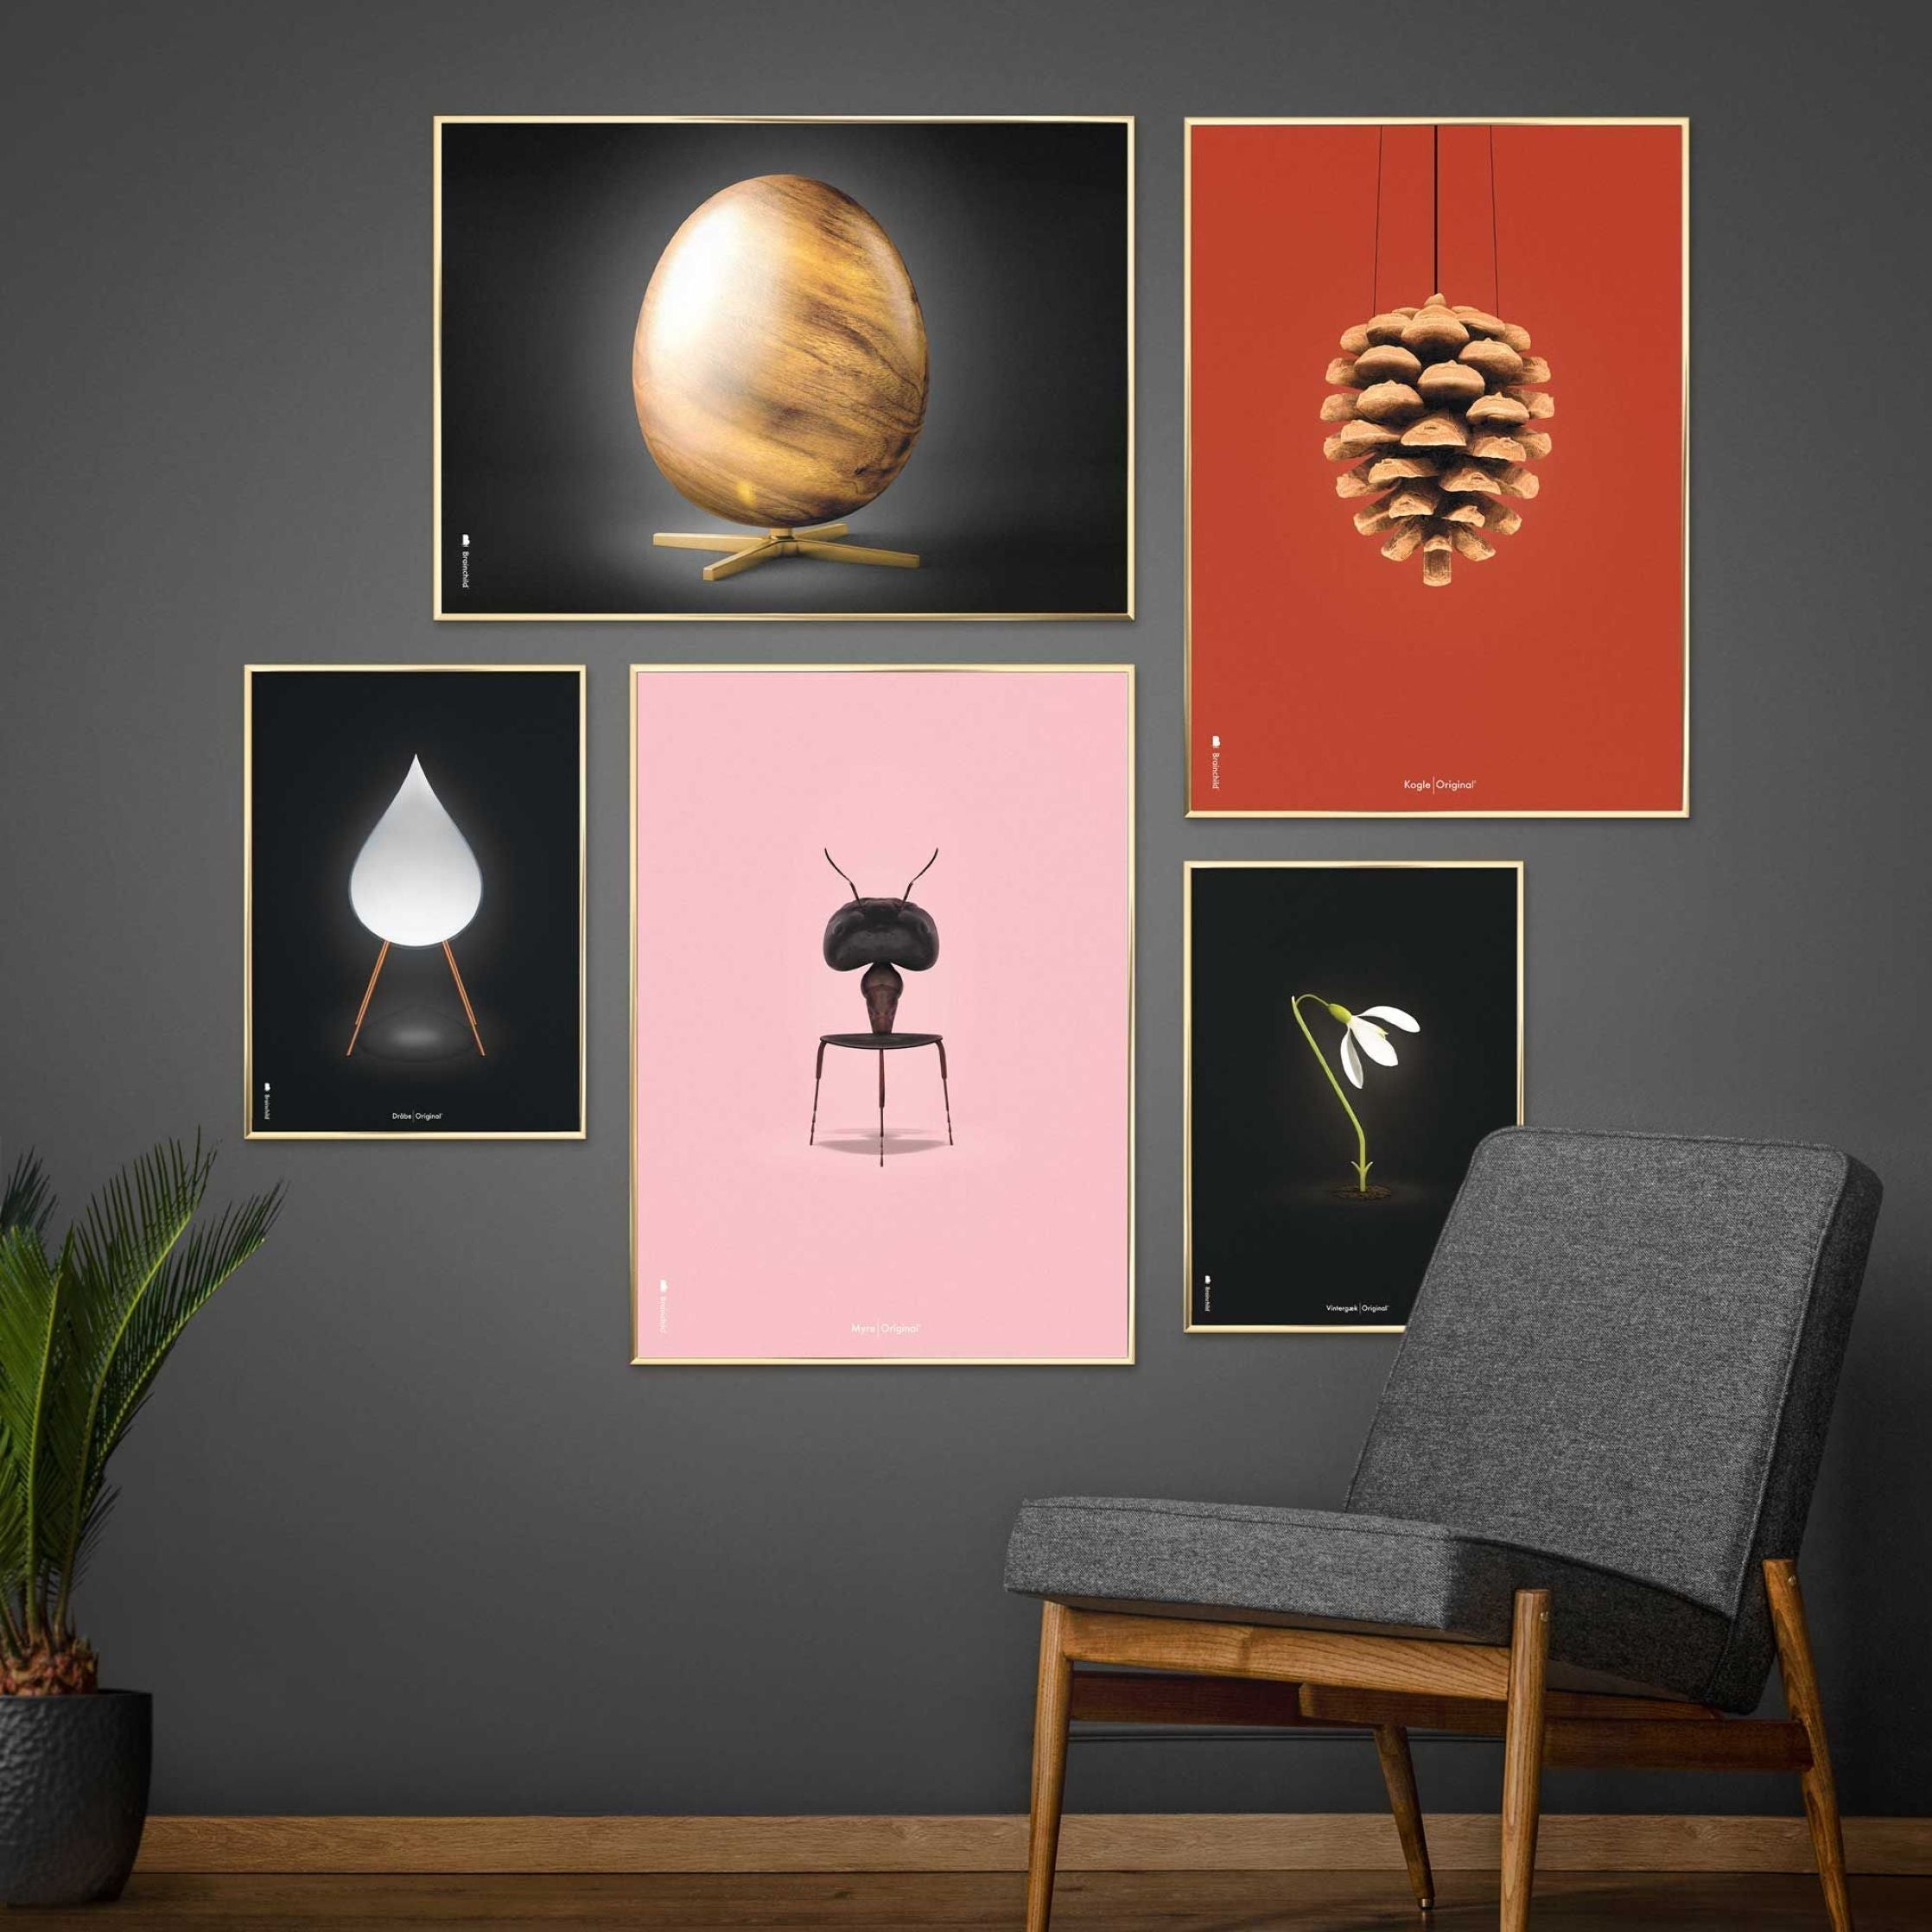 Brainchild Pine Cone Classic Poster, Frame In Black Lacquered Wood 50x70 Cm, Red Background